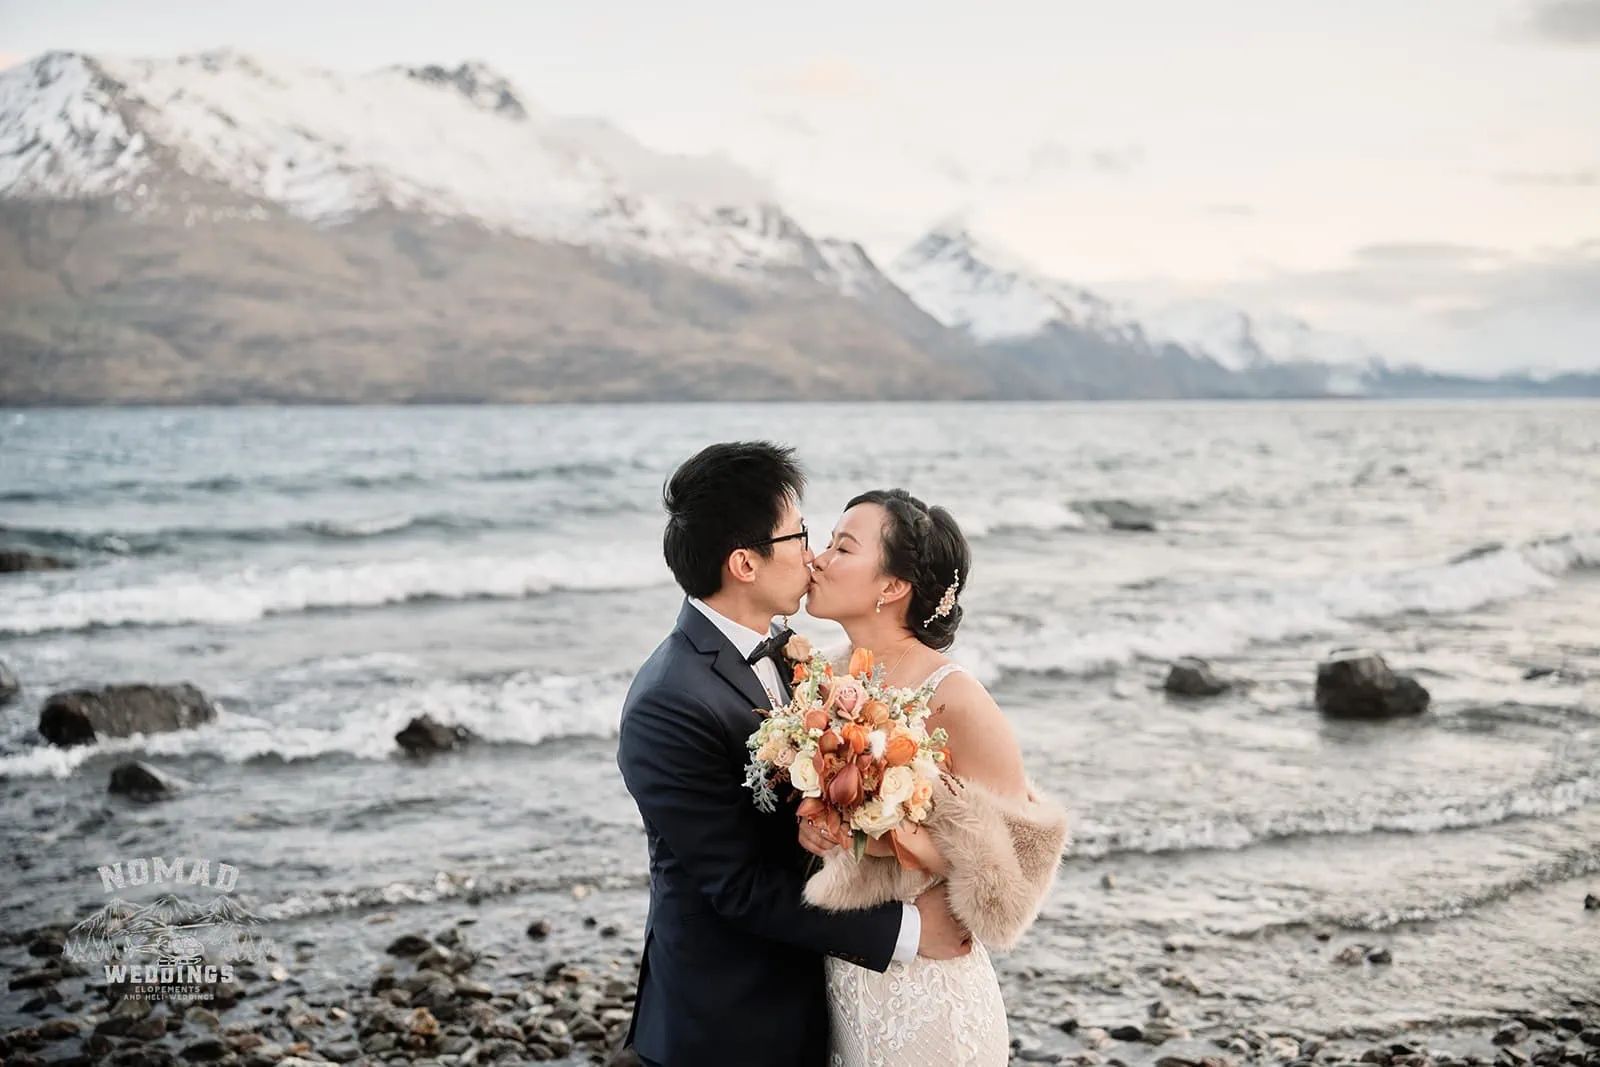 A pre-wedding shoot featuring Joanna and Tony, a bride and groom, sharing a kiss on the picturesque shore of Lake Wanaka in Queenstown, New Zealand.